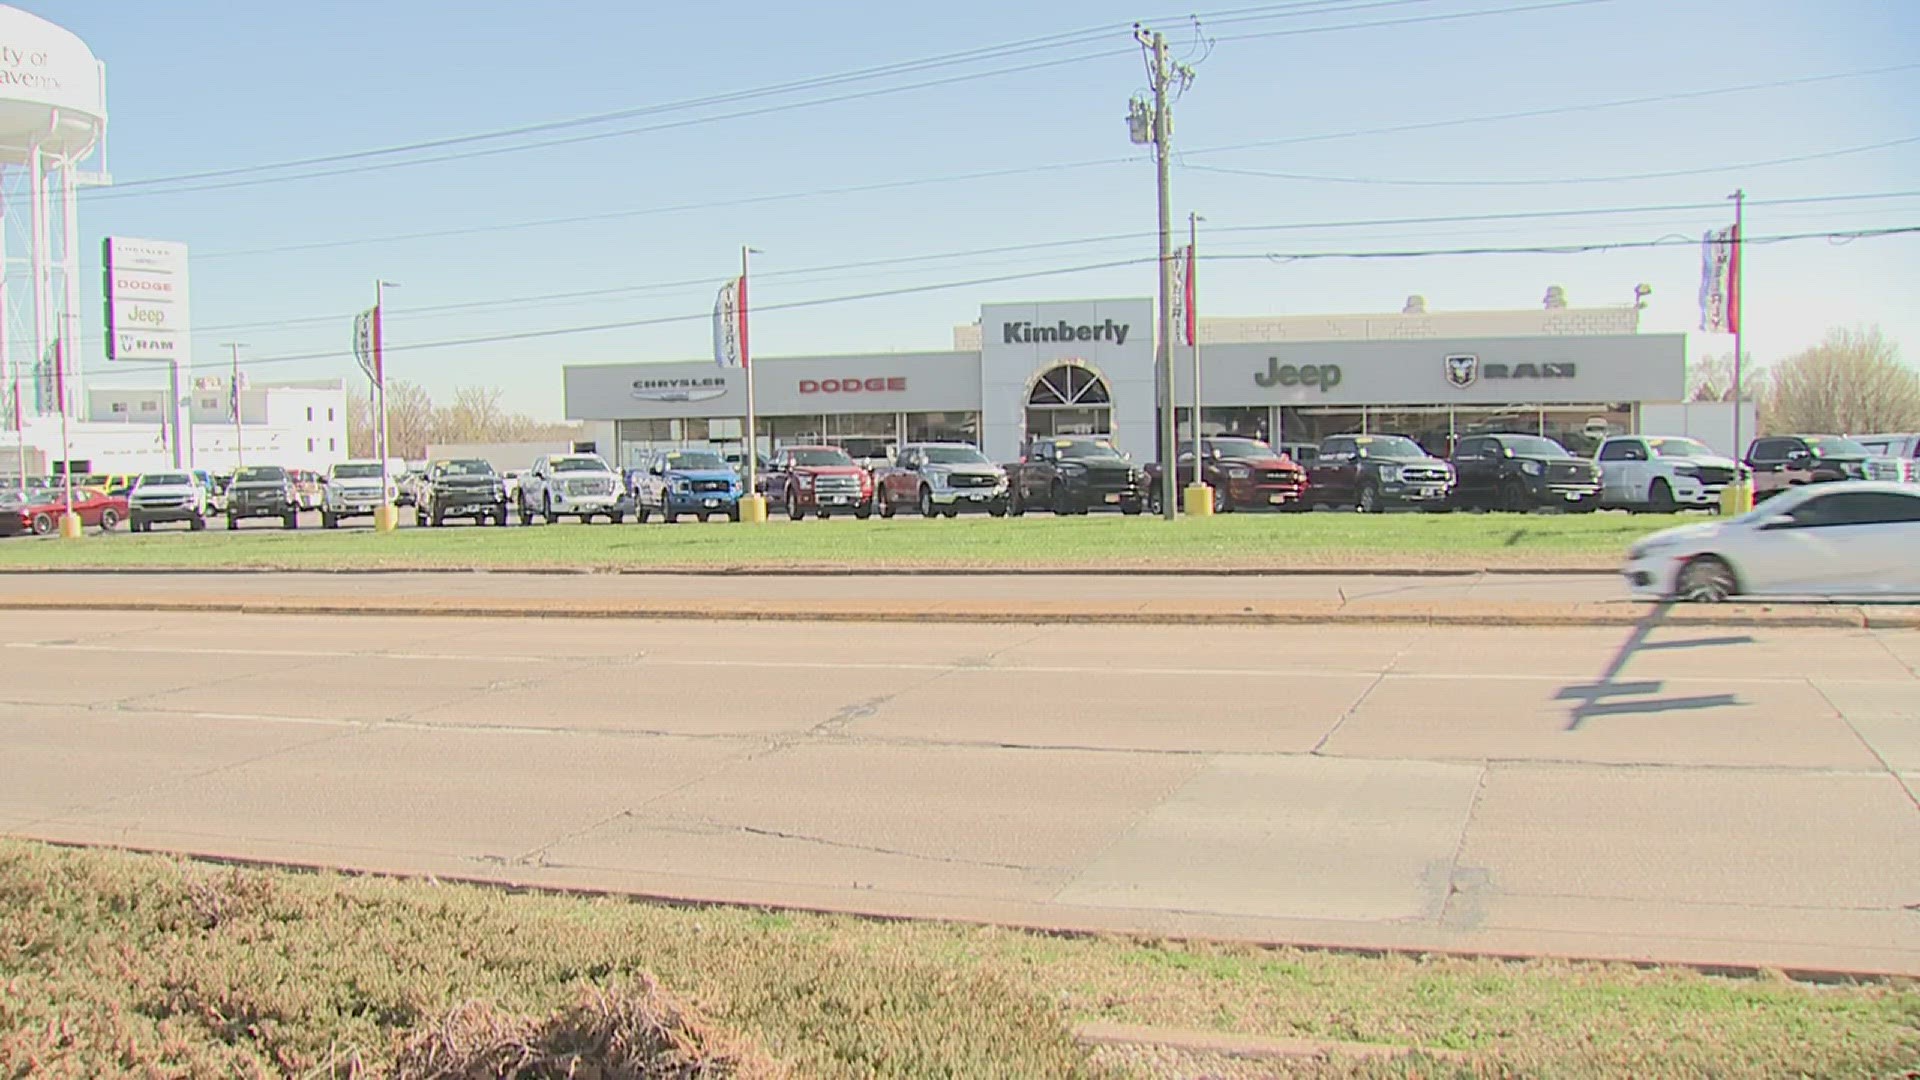 The dealership is selling new and used cars at a reduced price before they're fixed.